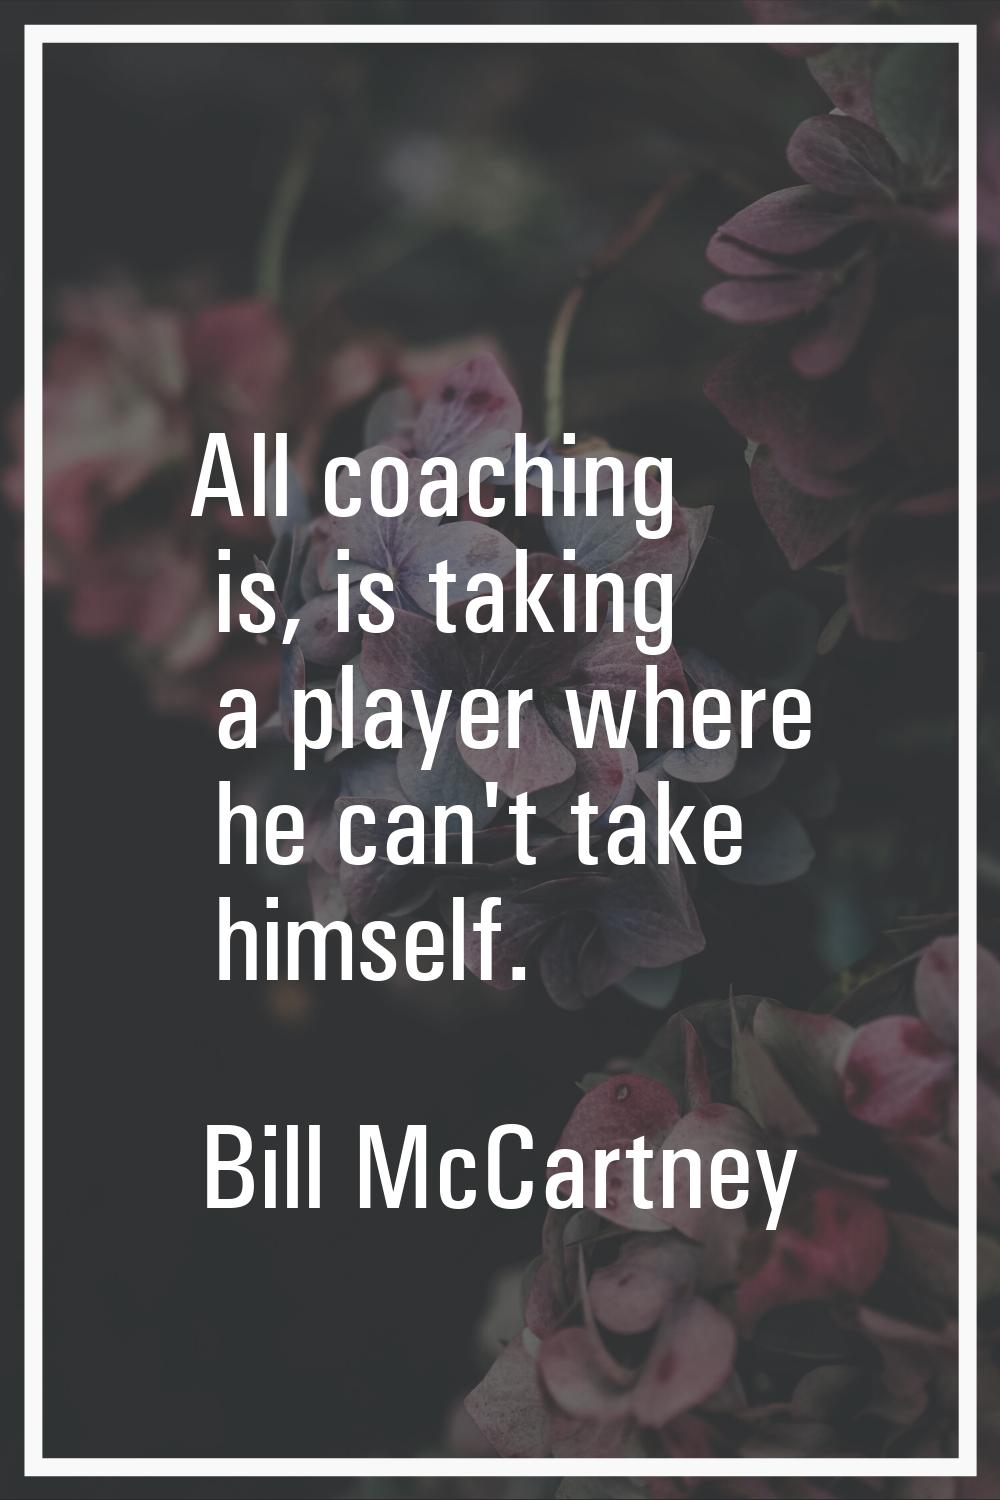 All coaching is, is taking a player where he can't take himself.